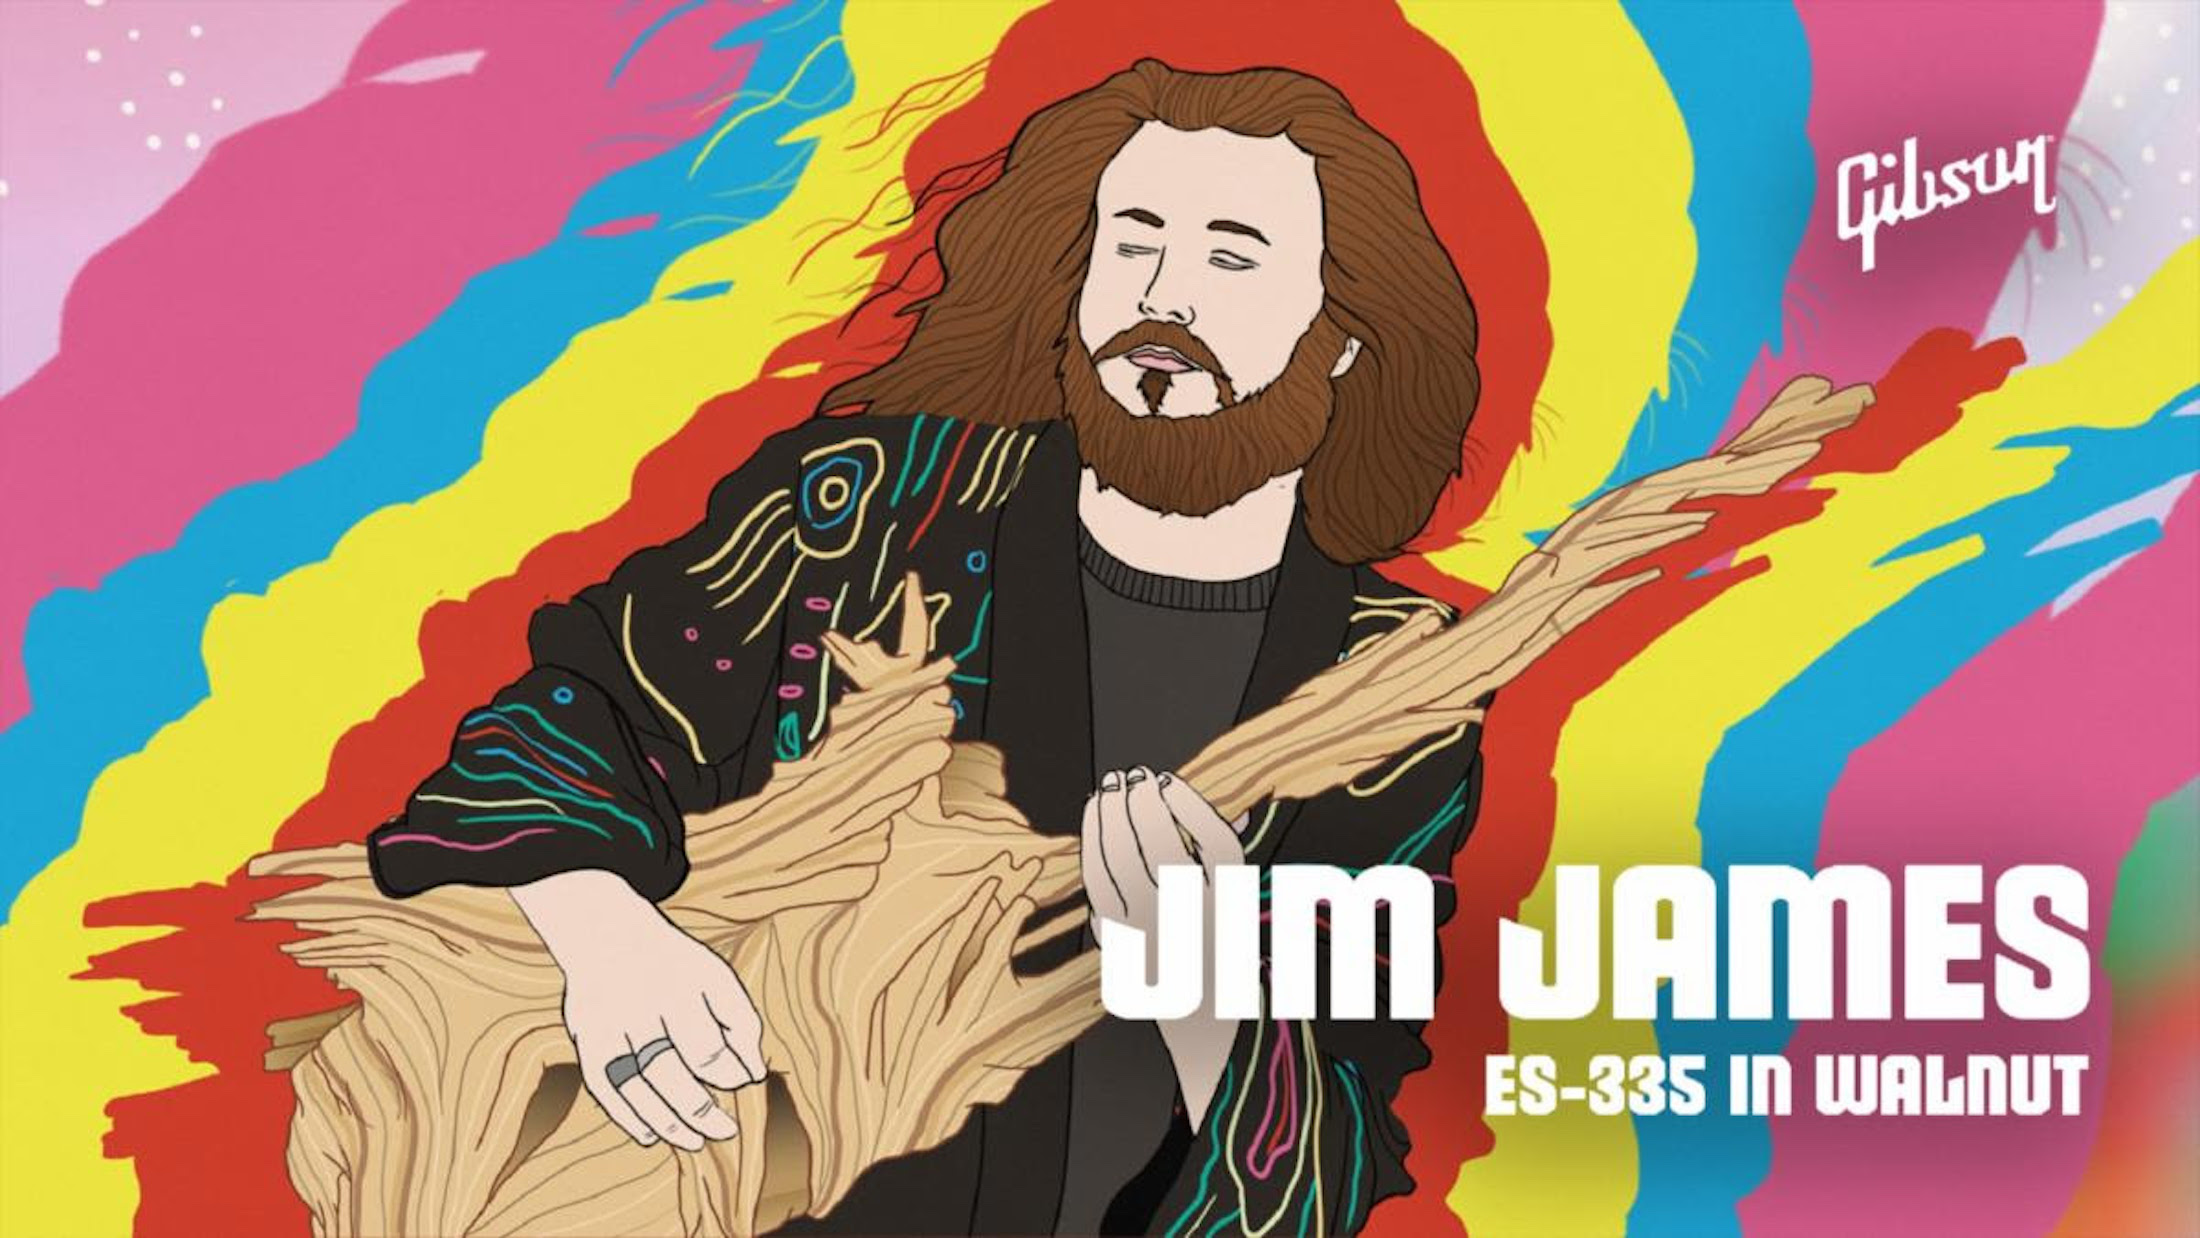 My Morning Jacket’s Jim James Partners With Gibson For His First Signature Guitar